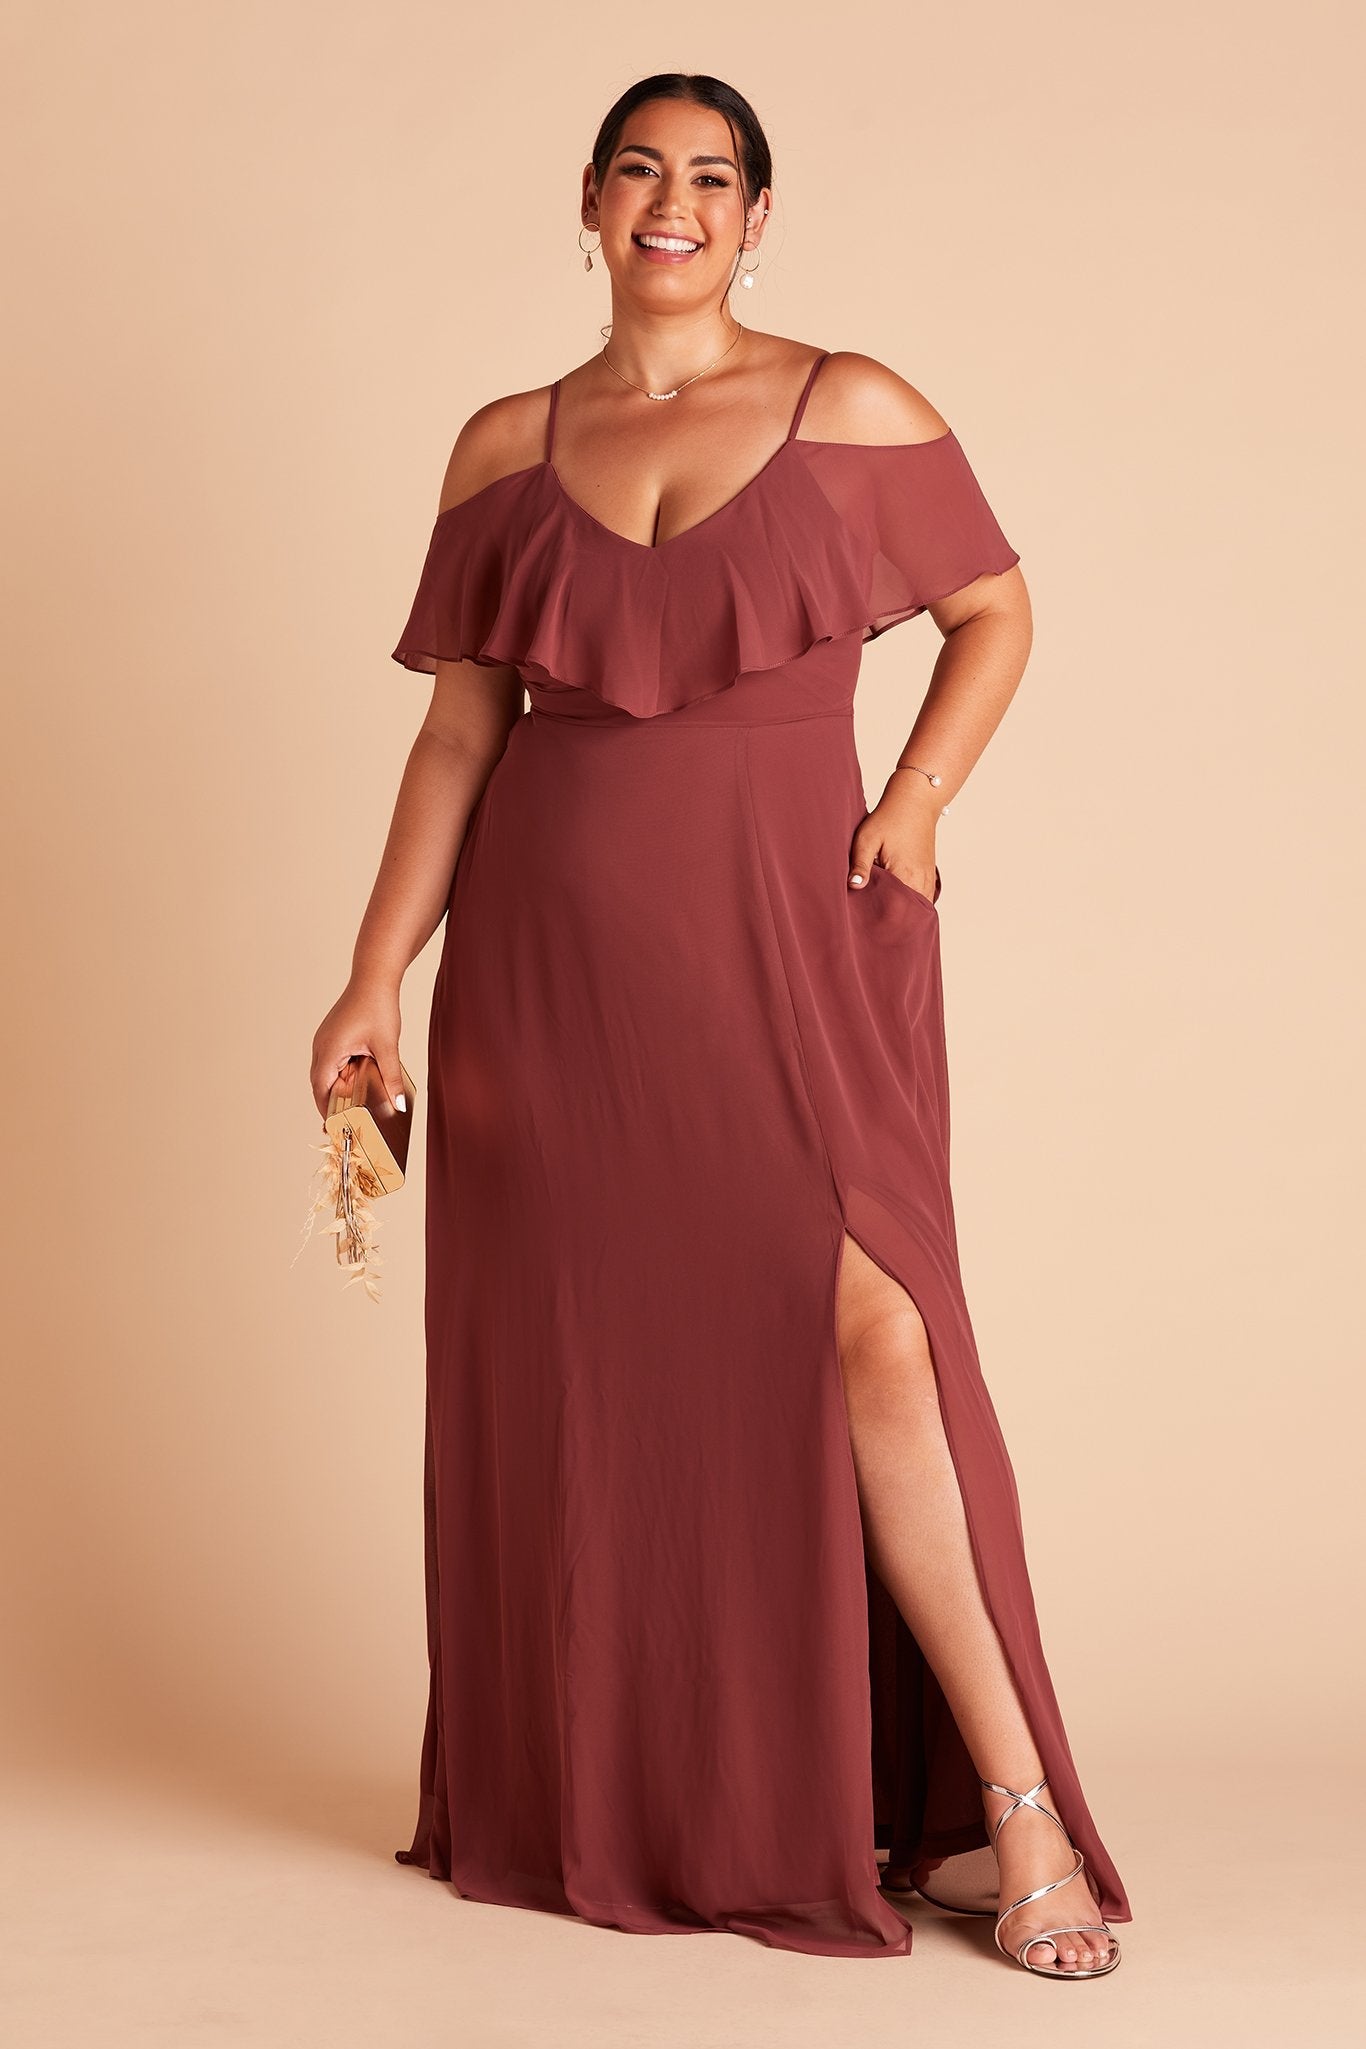 Jane convertible plus size bridesmaid dress with slit in rosewood chiffon by Birdy Grey, front view with hand in pocket